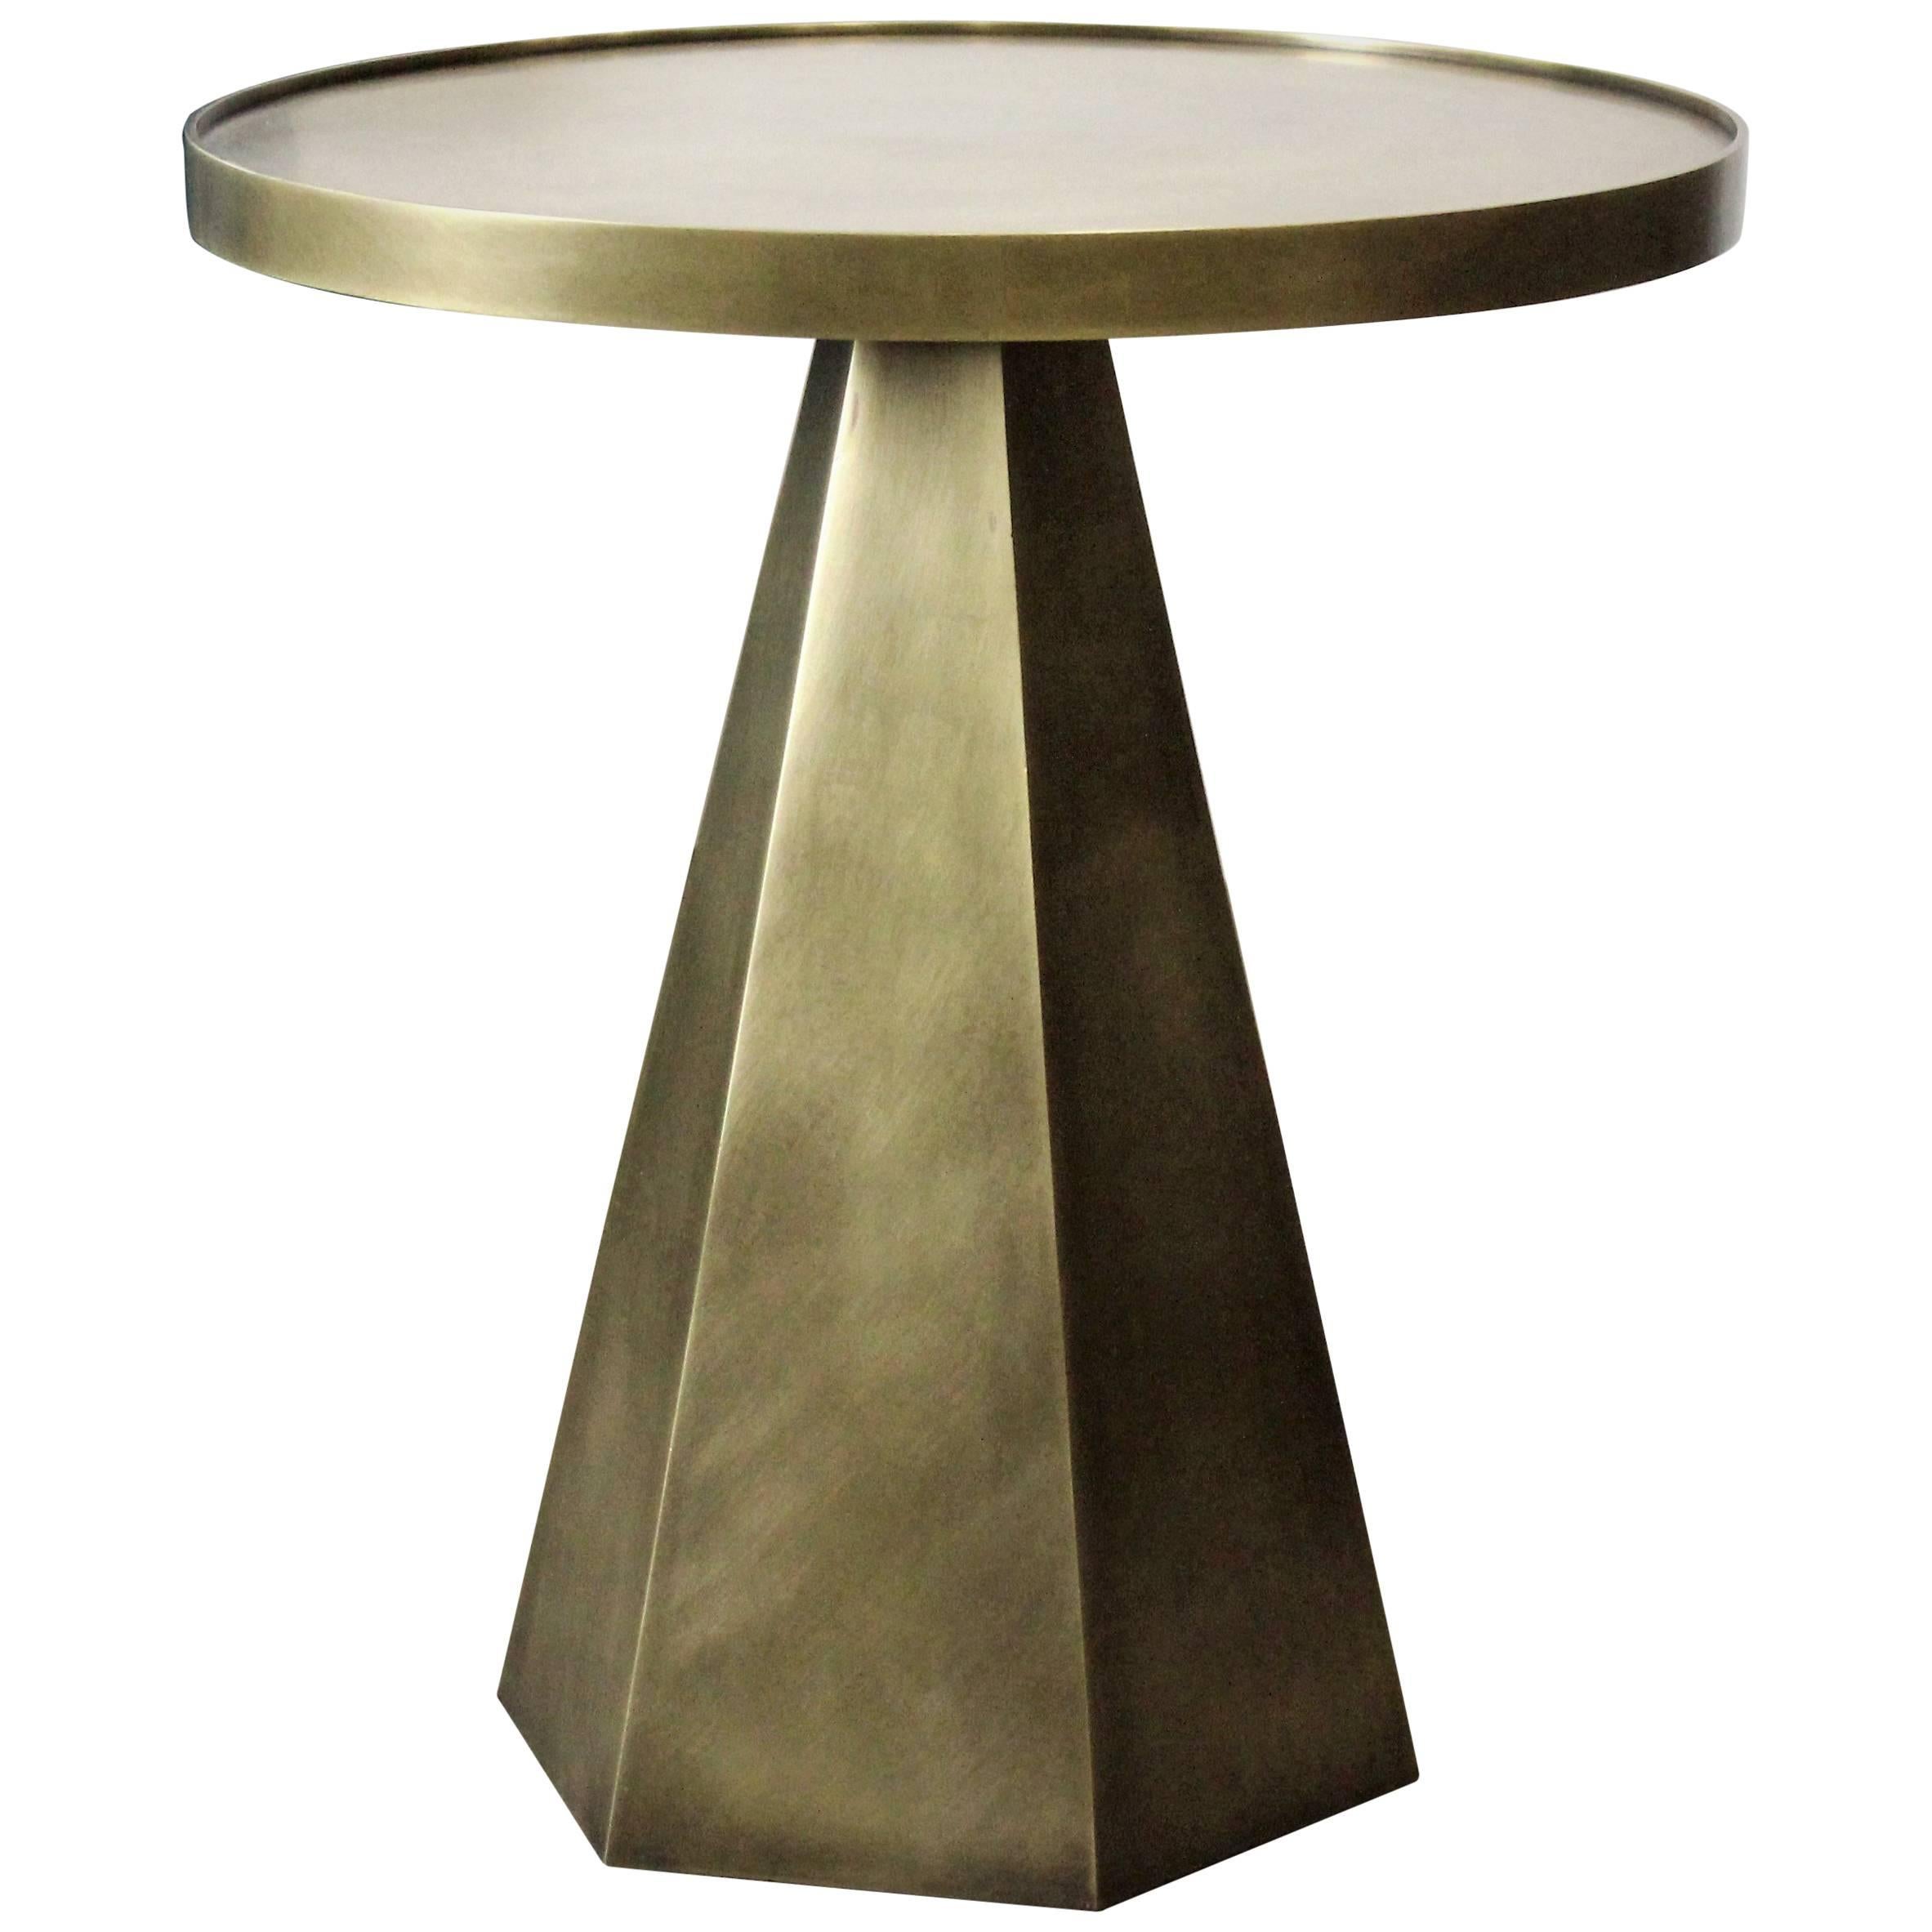 Sculptural Hand-Forged Hexagonal Side Table in Solid Patinated Brass